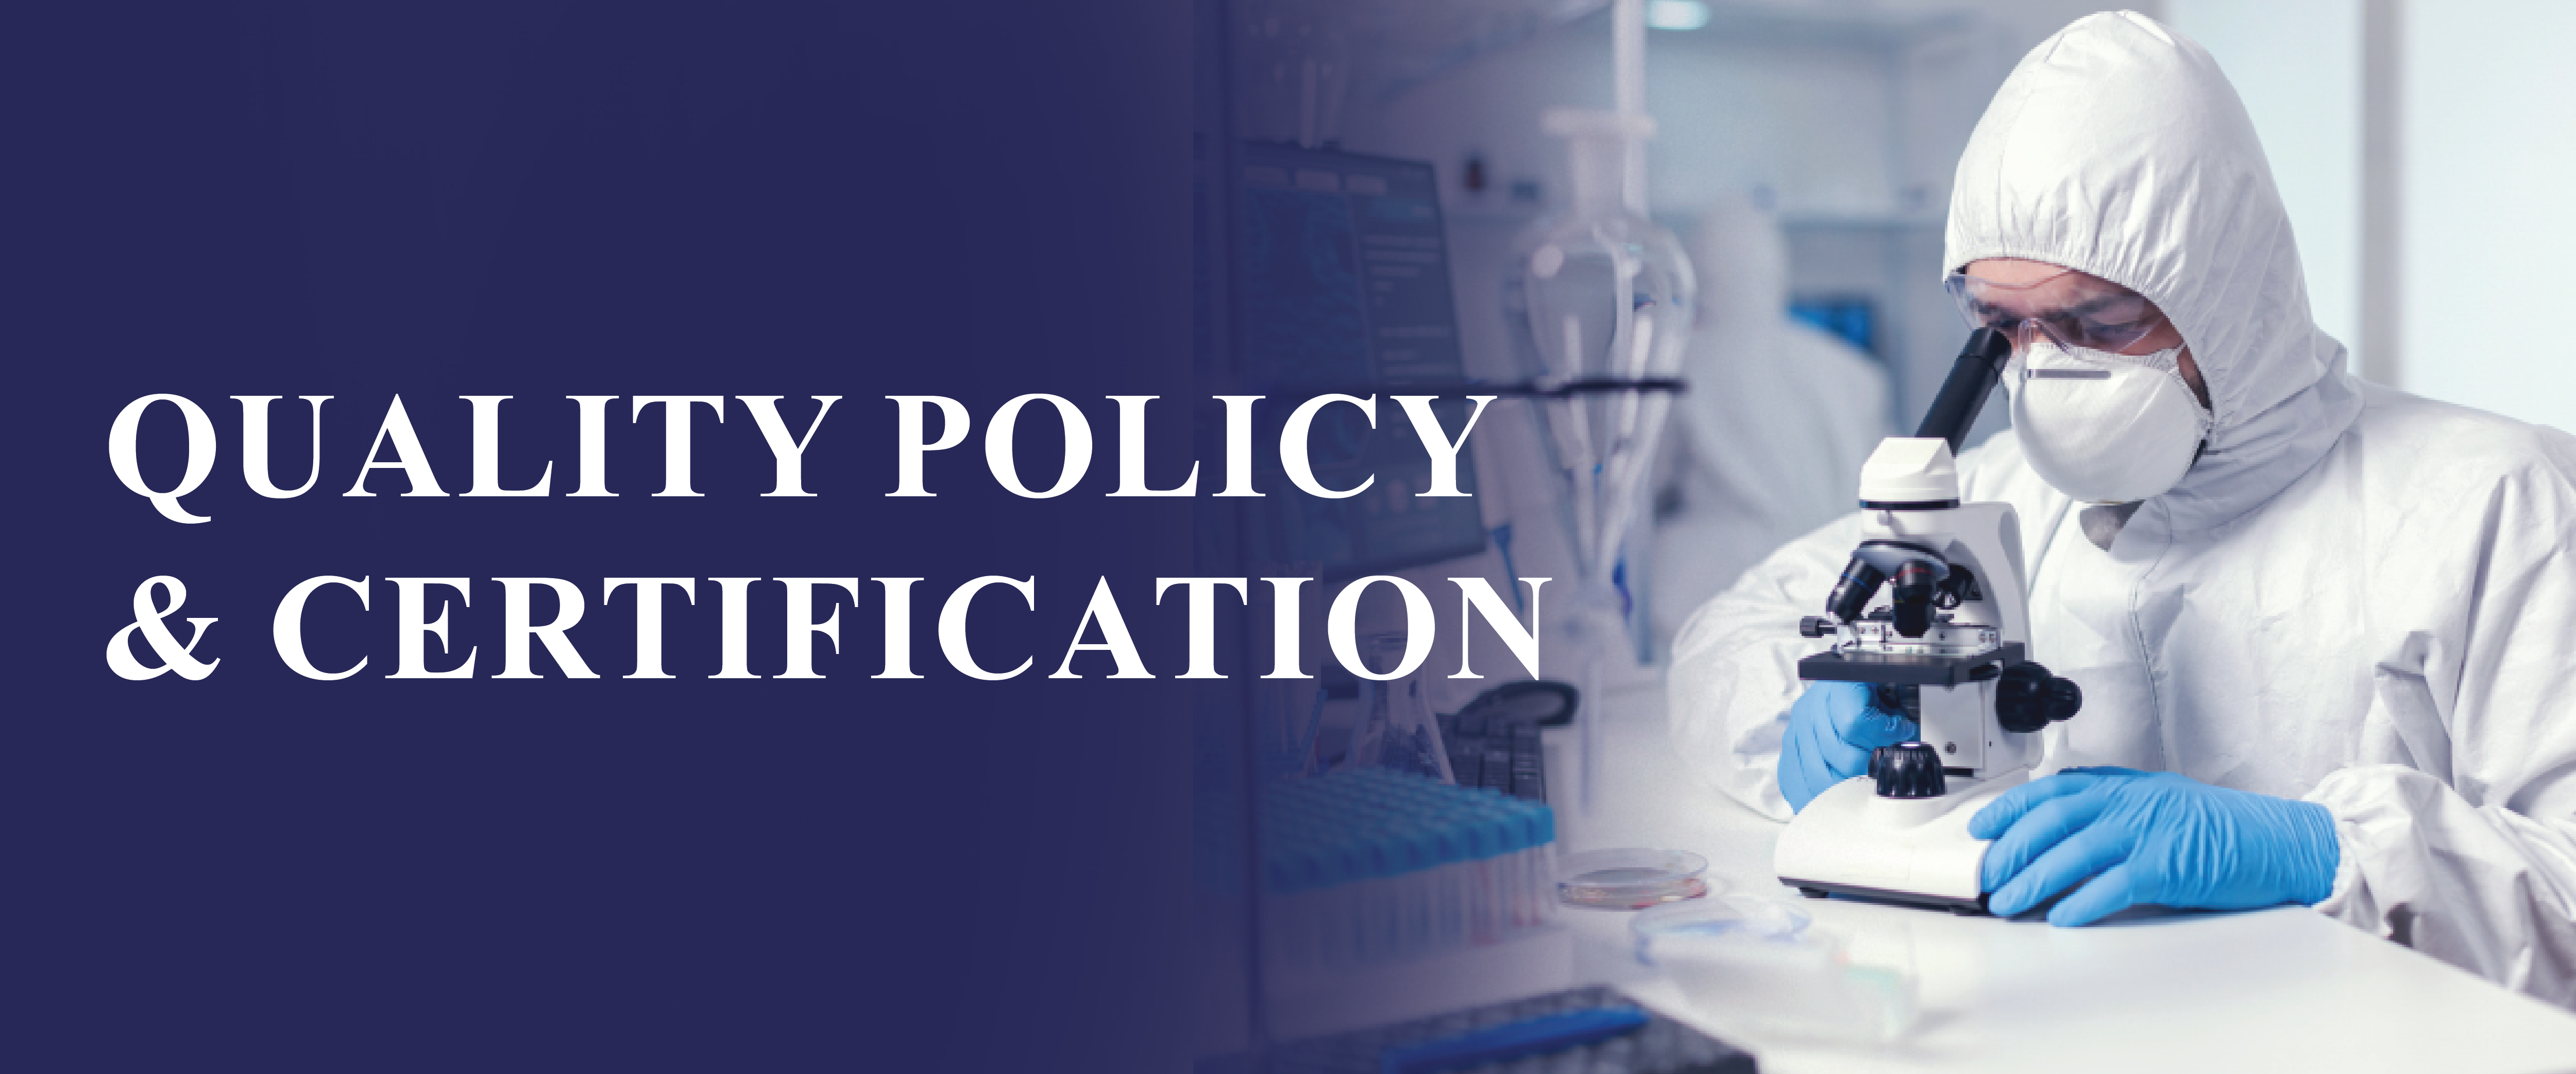 Quality Policy & Certifications